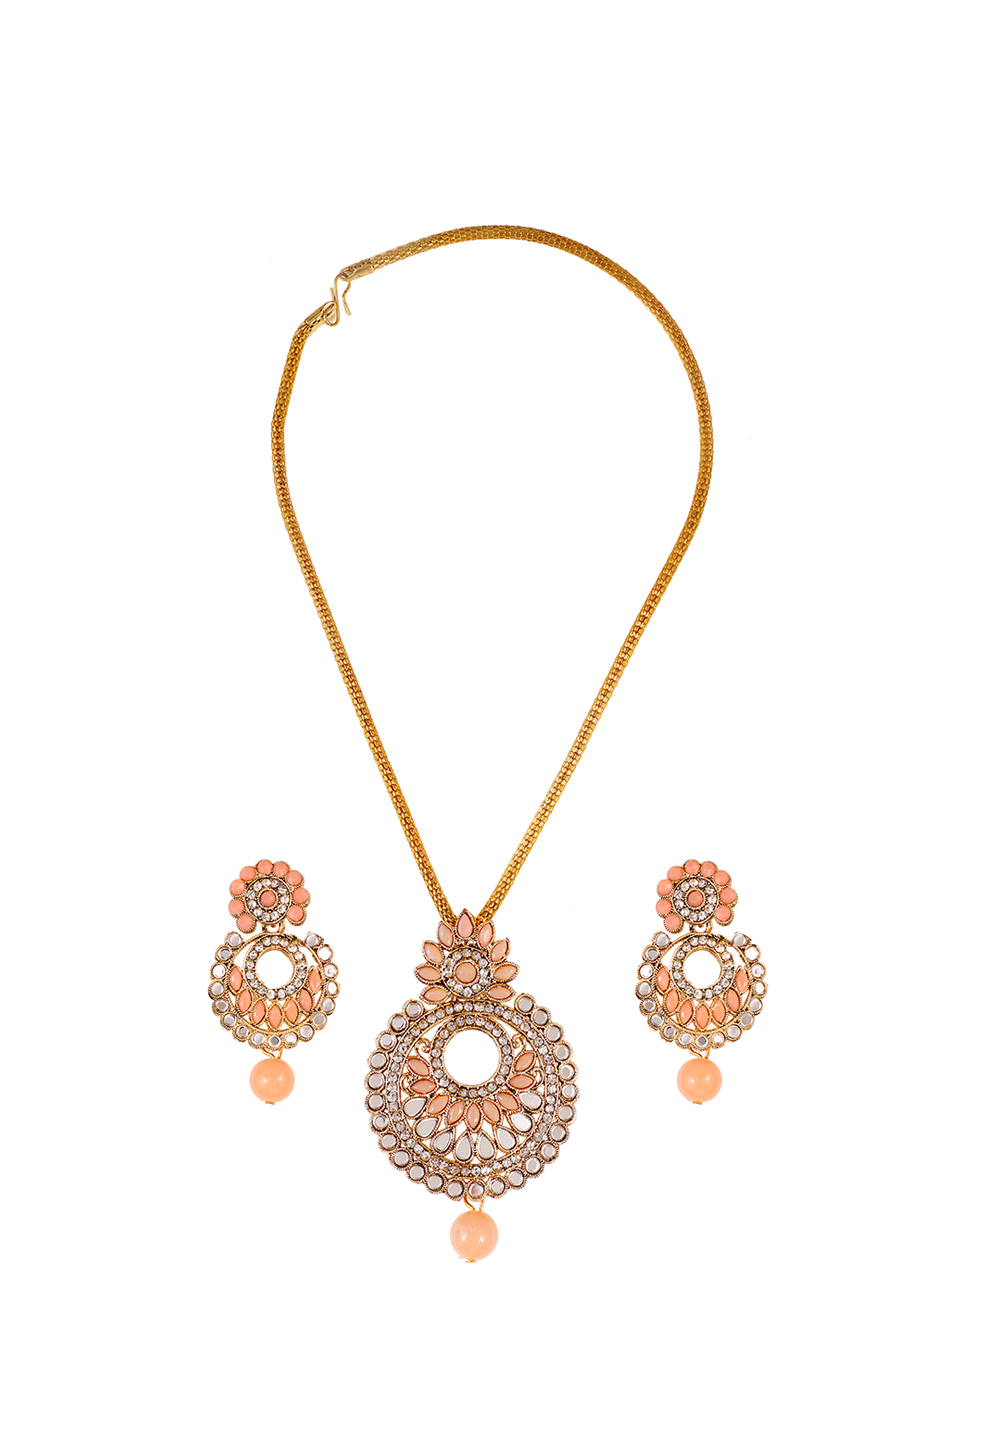 Peach Alloy Artificial Stone Necklace Set Earrings 254190